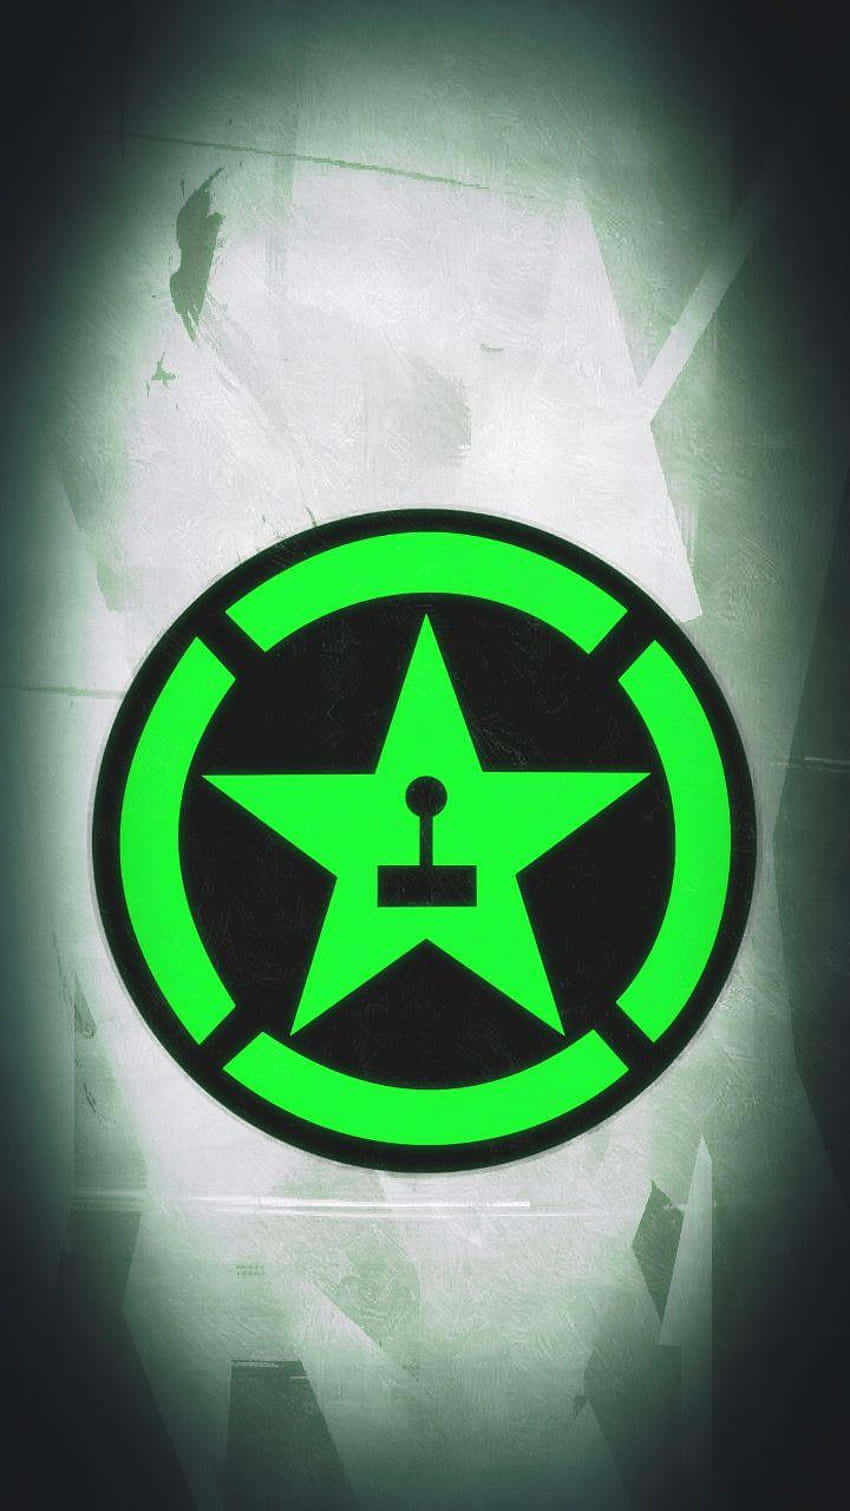 Achievement Hunter: Aiming For Success! Background